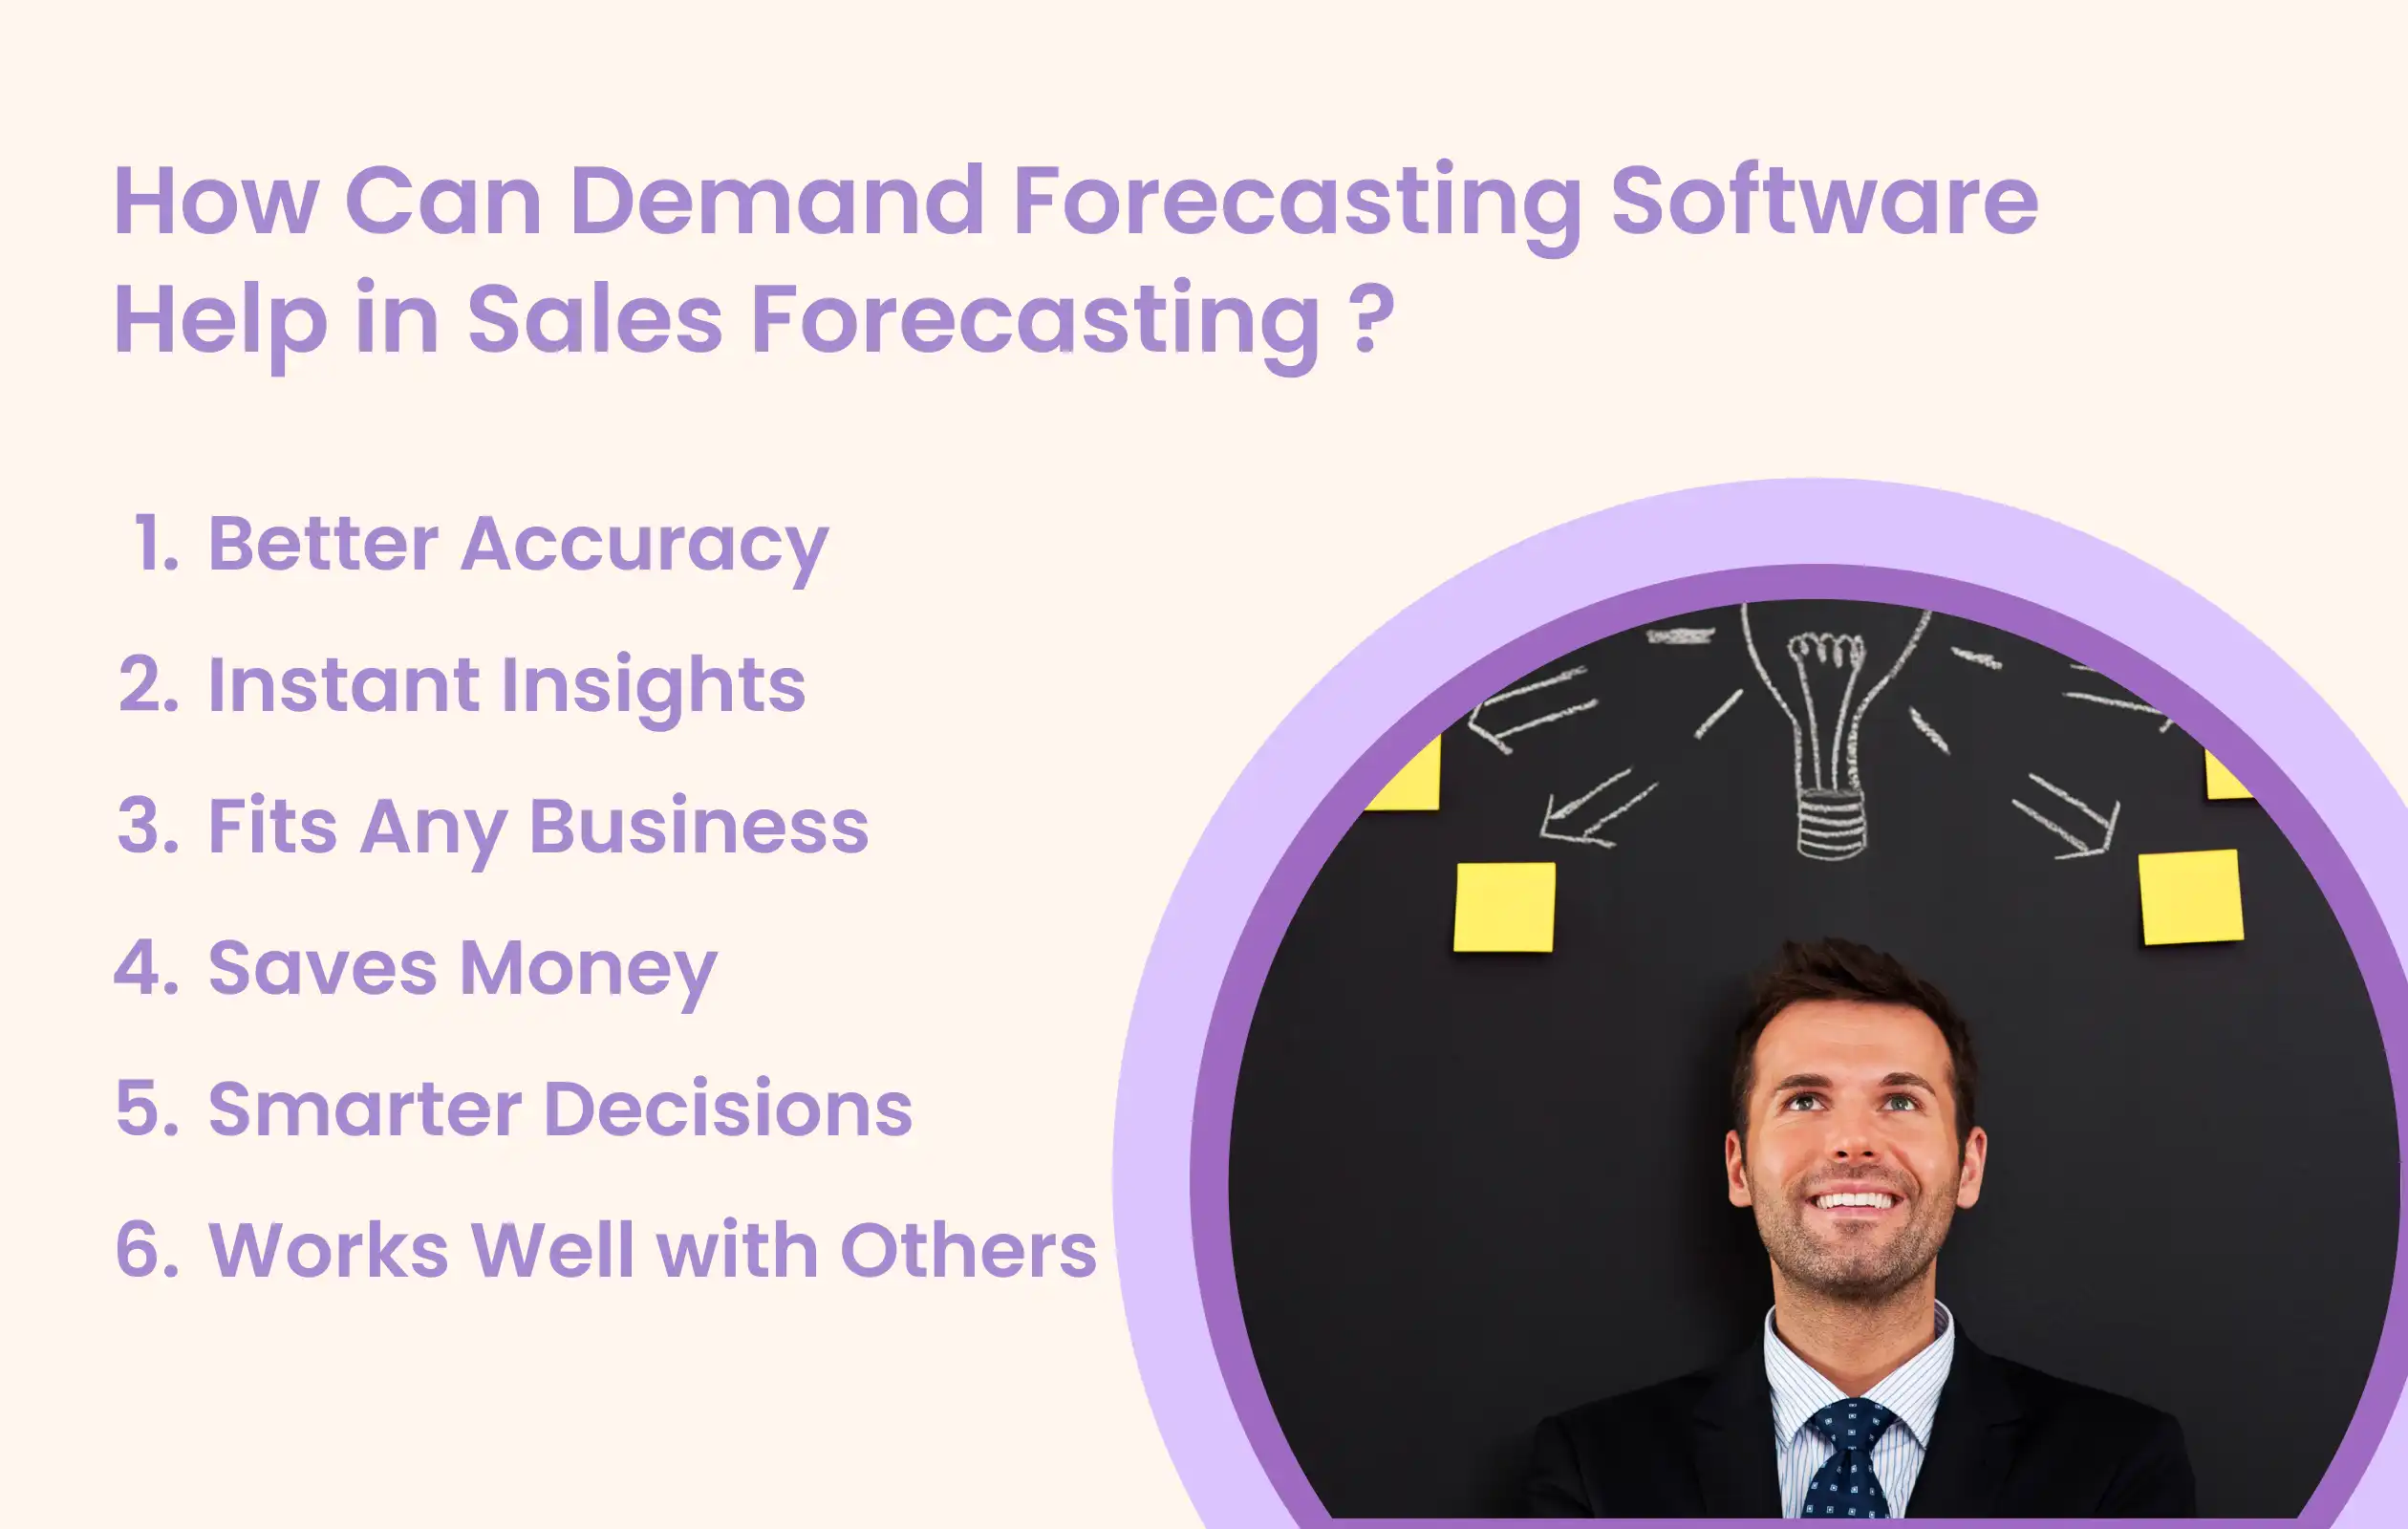 How Can Demand Forecasting Software Help in Sales Forecasting